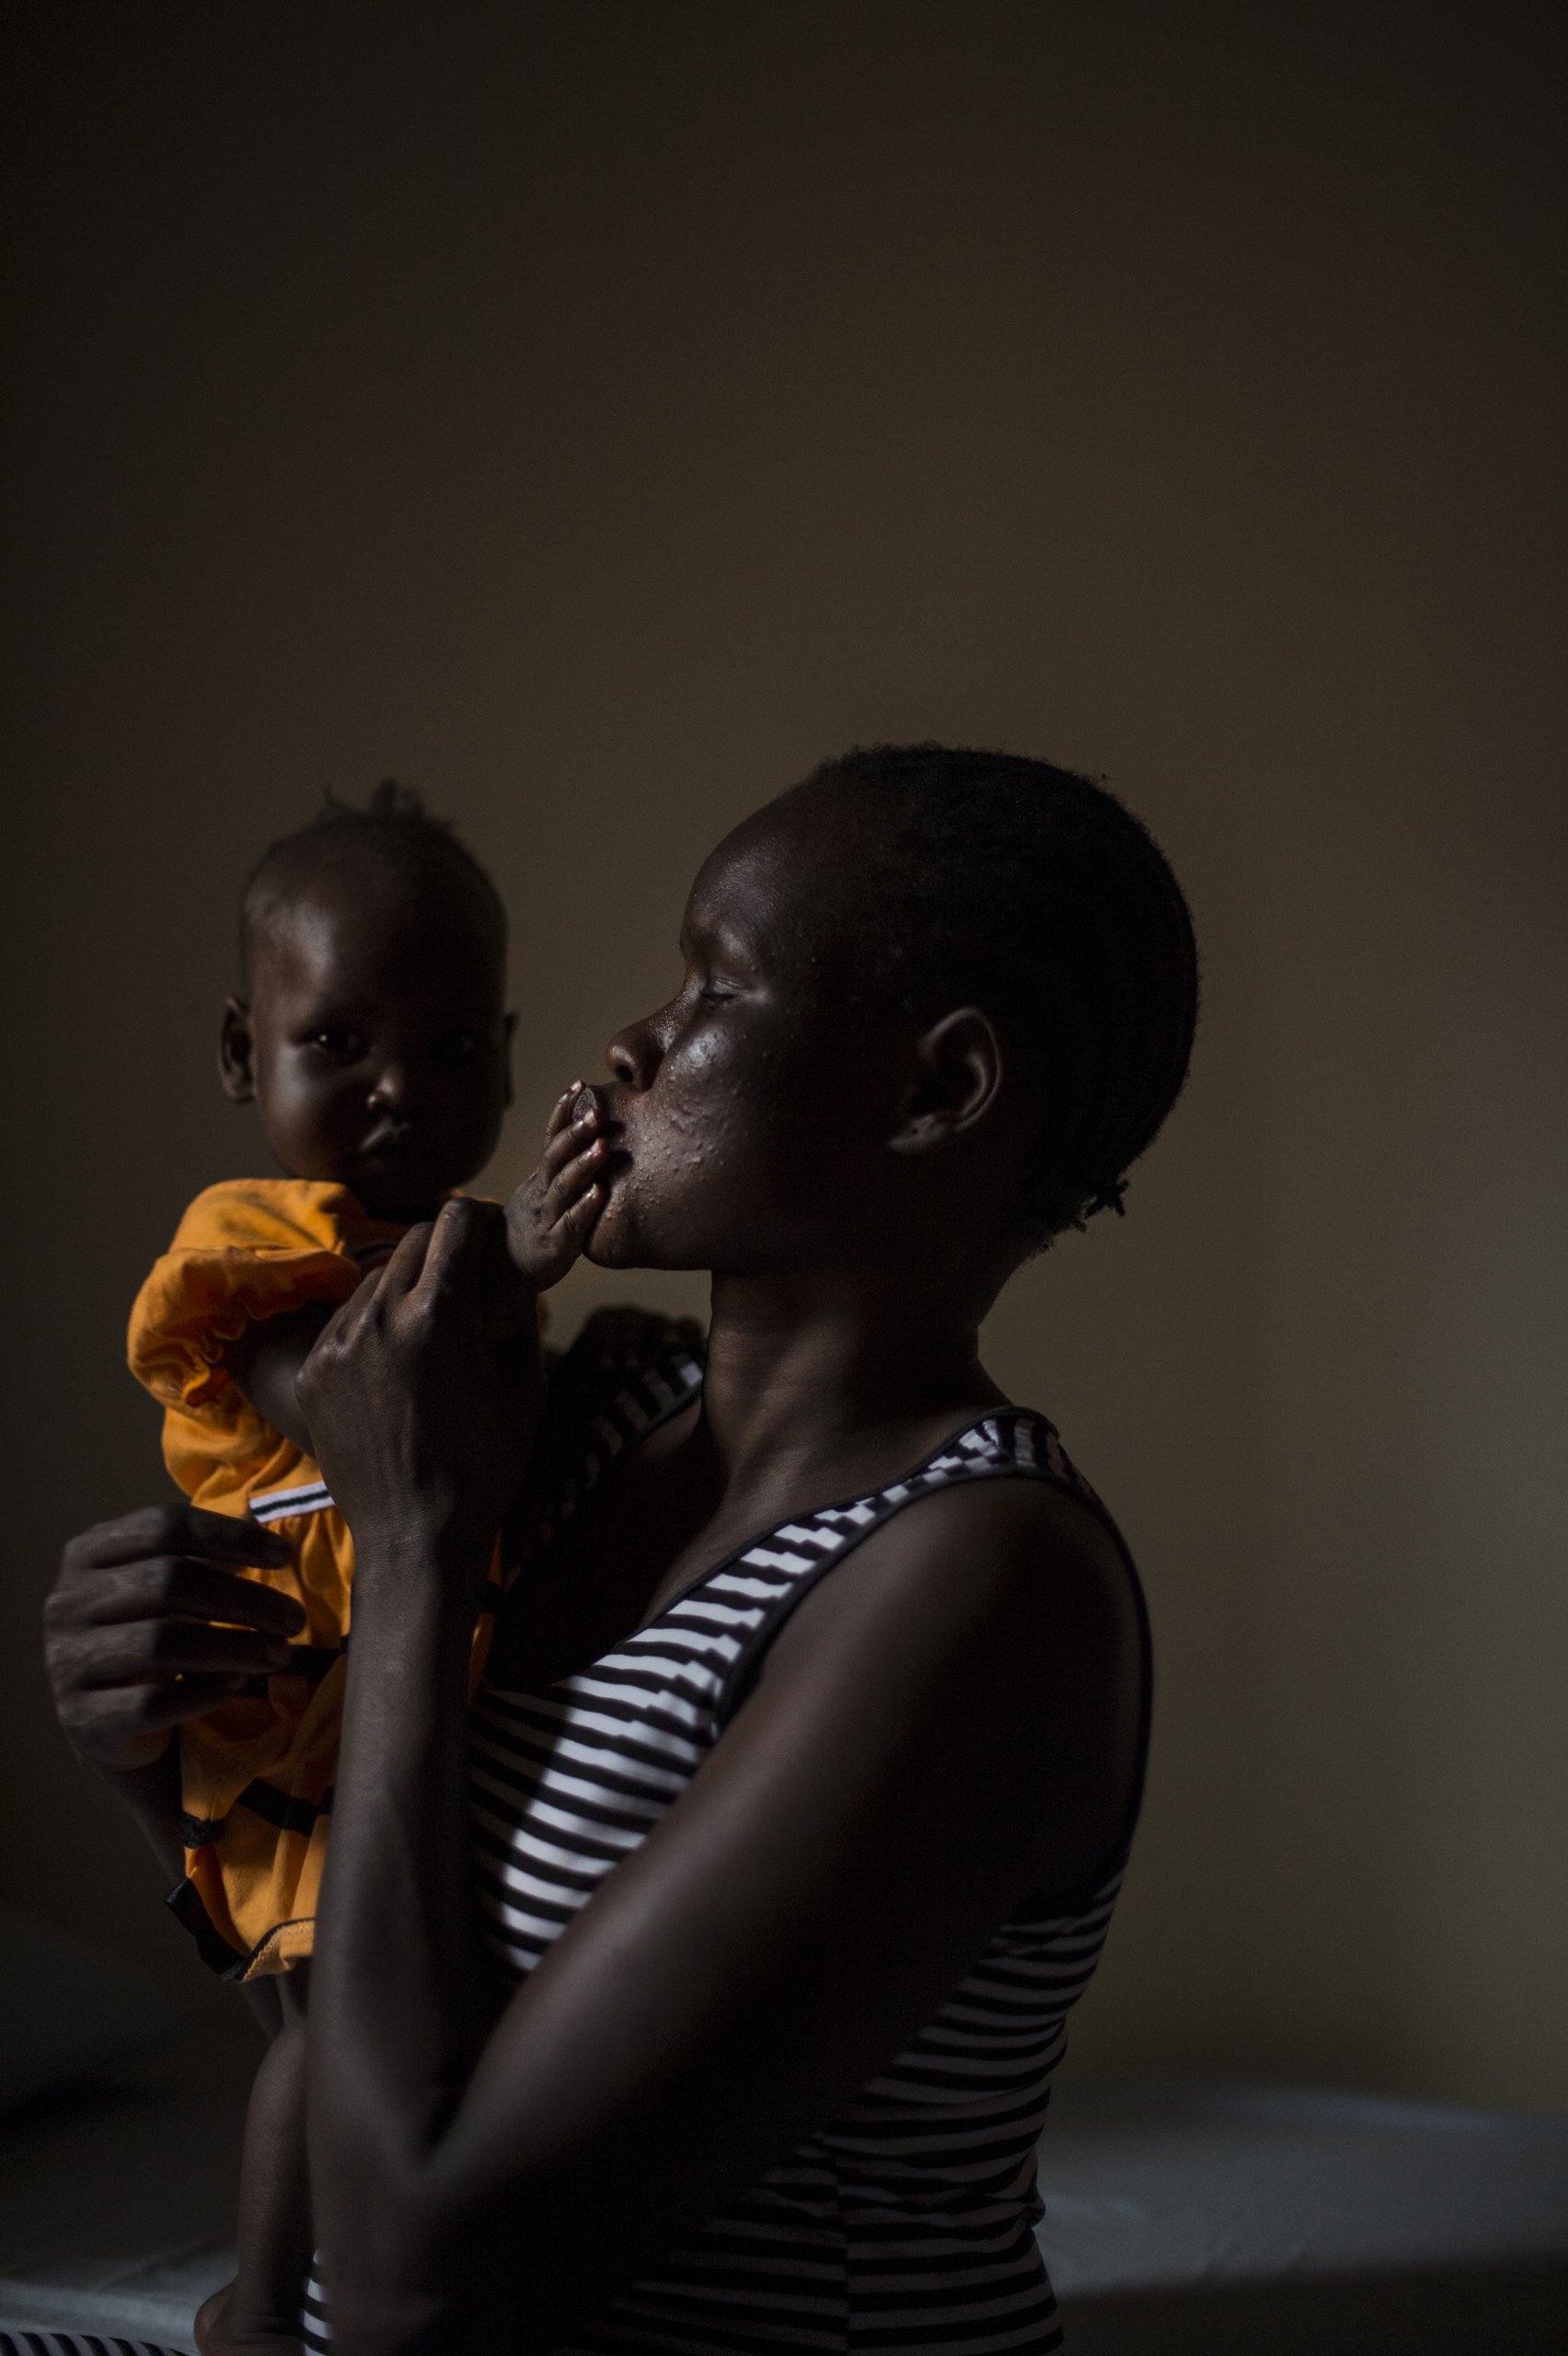 Mary, 27, holds her daughter, Nyakwat, 6 months old who was born after Mary was raped repeatedly at a U.N. camp in South Sudan by different men. She now lives in a safe house in Uganda, Dec. 8, 2015. Mary, a member of the Nuer tribe, watched as her husband and her two sons were killed in front of her by soldiers of the Dinka tribe. Five of them held her down as three others raped her 10-year-old daughter who died hours later. The soldiers, who also raped Mary, told her that they considered the Nuers in the camps to be rebels, and that they killed her sons because they couldn’t risk letting them grow up to be fighters. Mary made her way to a U.N. camp for civilians displaced by war where she lived for a year and was raped by soldiers who made their way into the camp. Since December 2013, the new country of South Sudan has been roiled by a vicious power struggle between President Salva Kiir, a member of the Dinka tribe, and his Vice President, Riek Machar, a Nuer. Their war, fought largely along ethnic lines, has turned the northern part of the country into a wasteland.